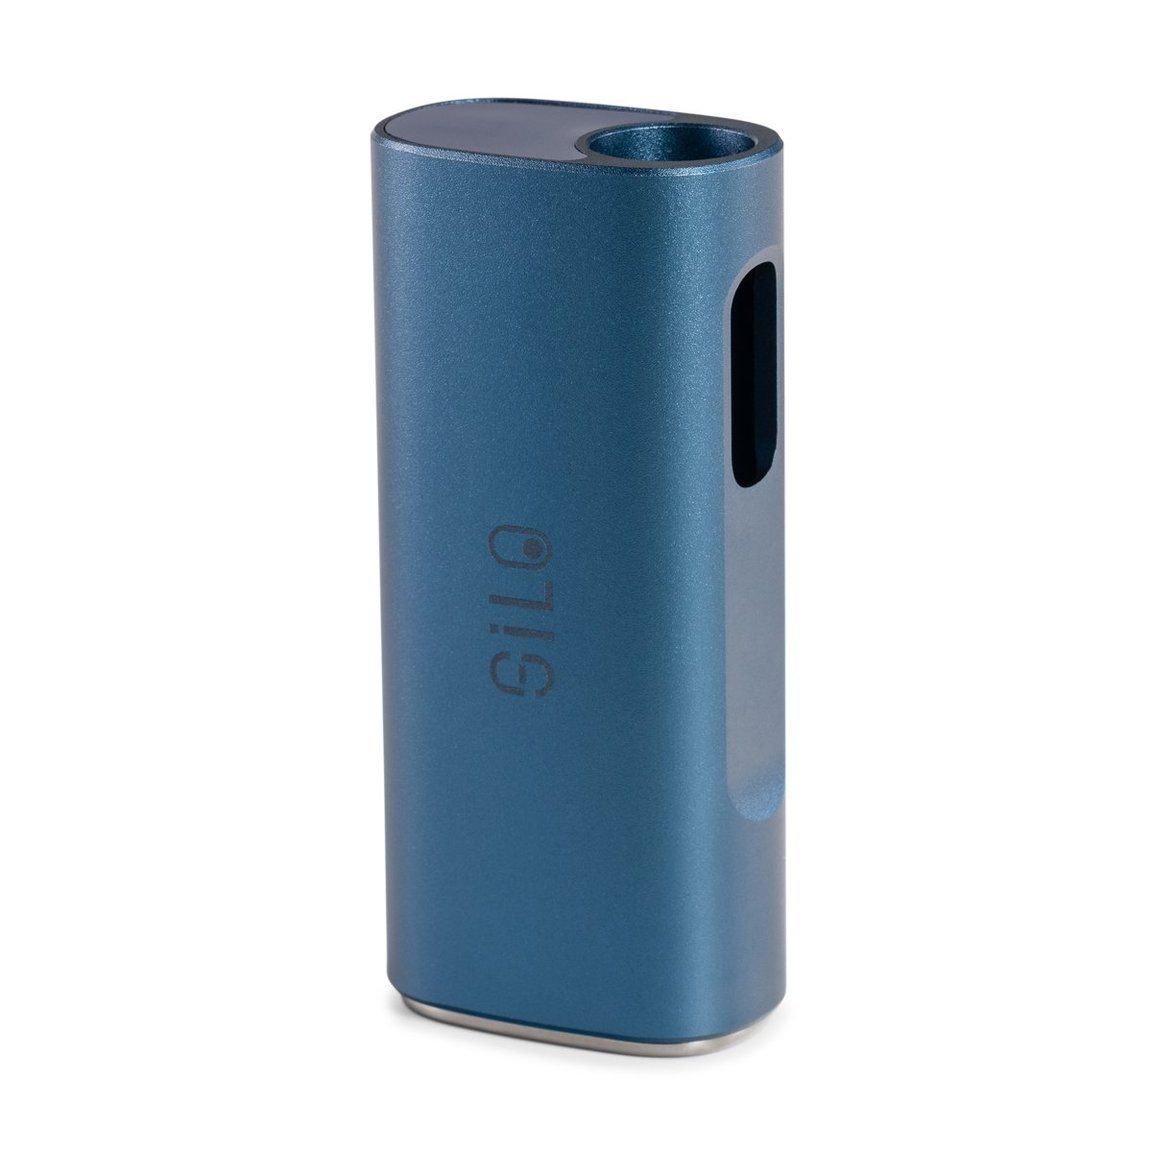  Silo Ccell 